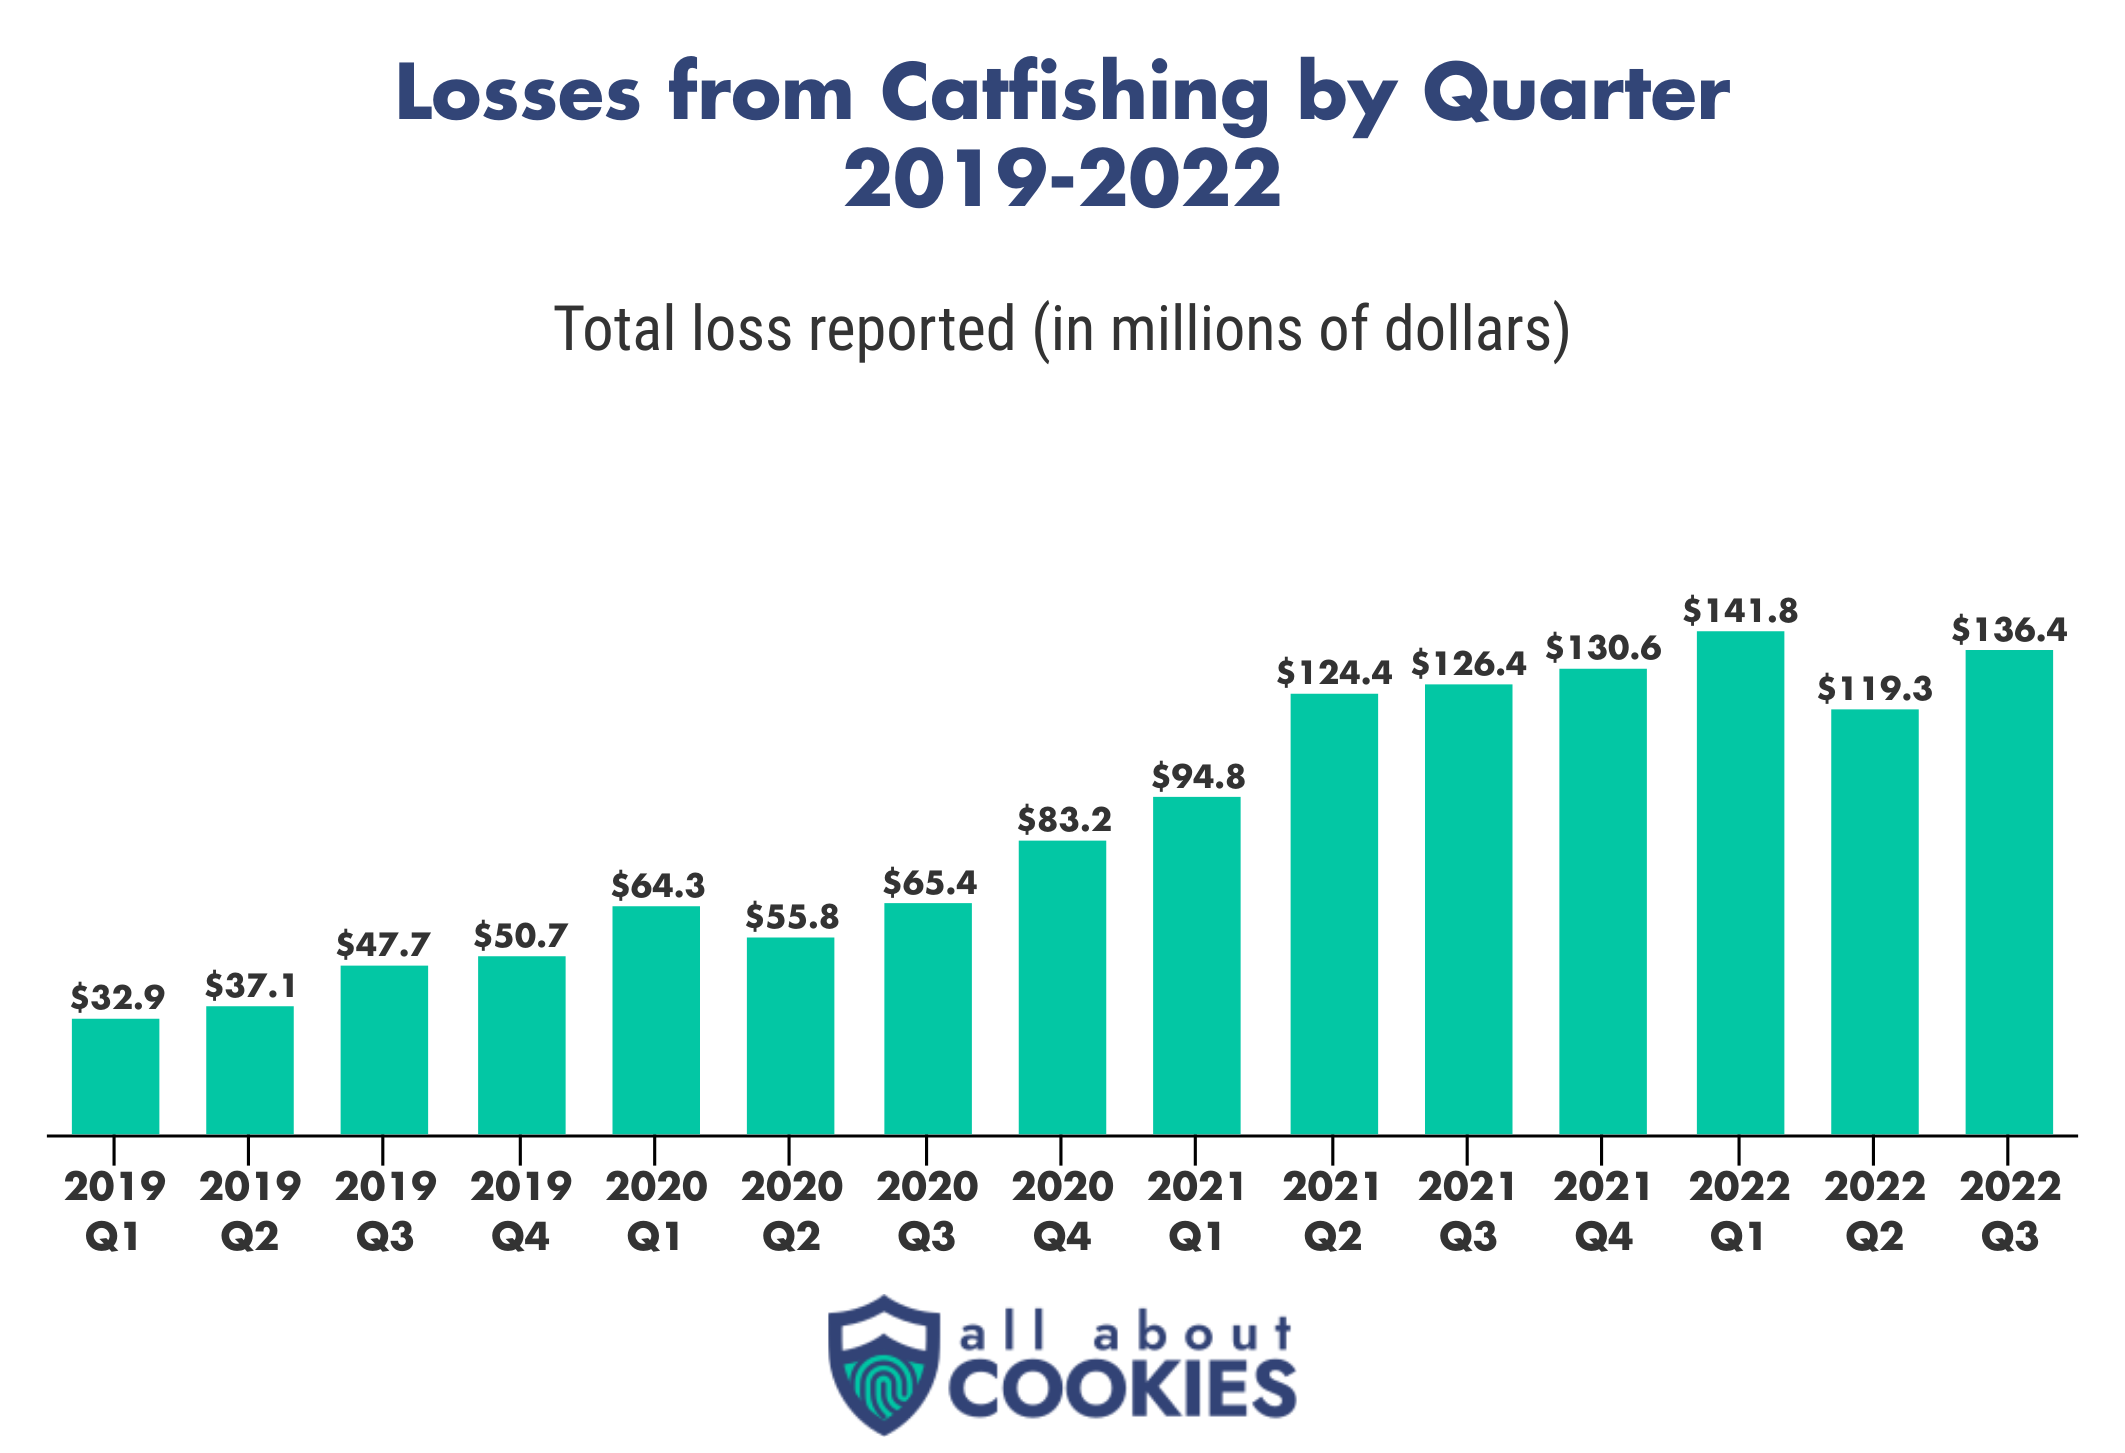 Losses from catfishing scams have steadily risen from $32.9M in 2019 to $136.4M in 2022.